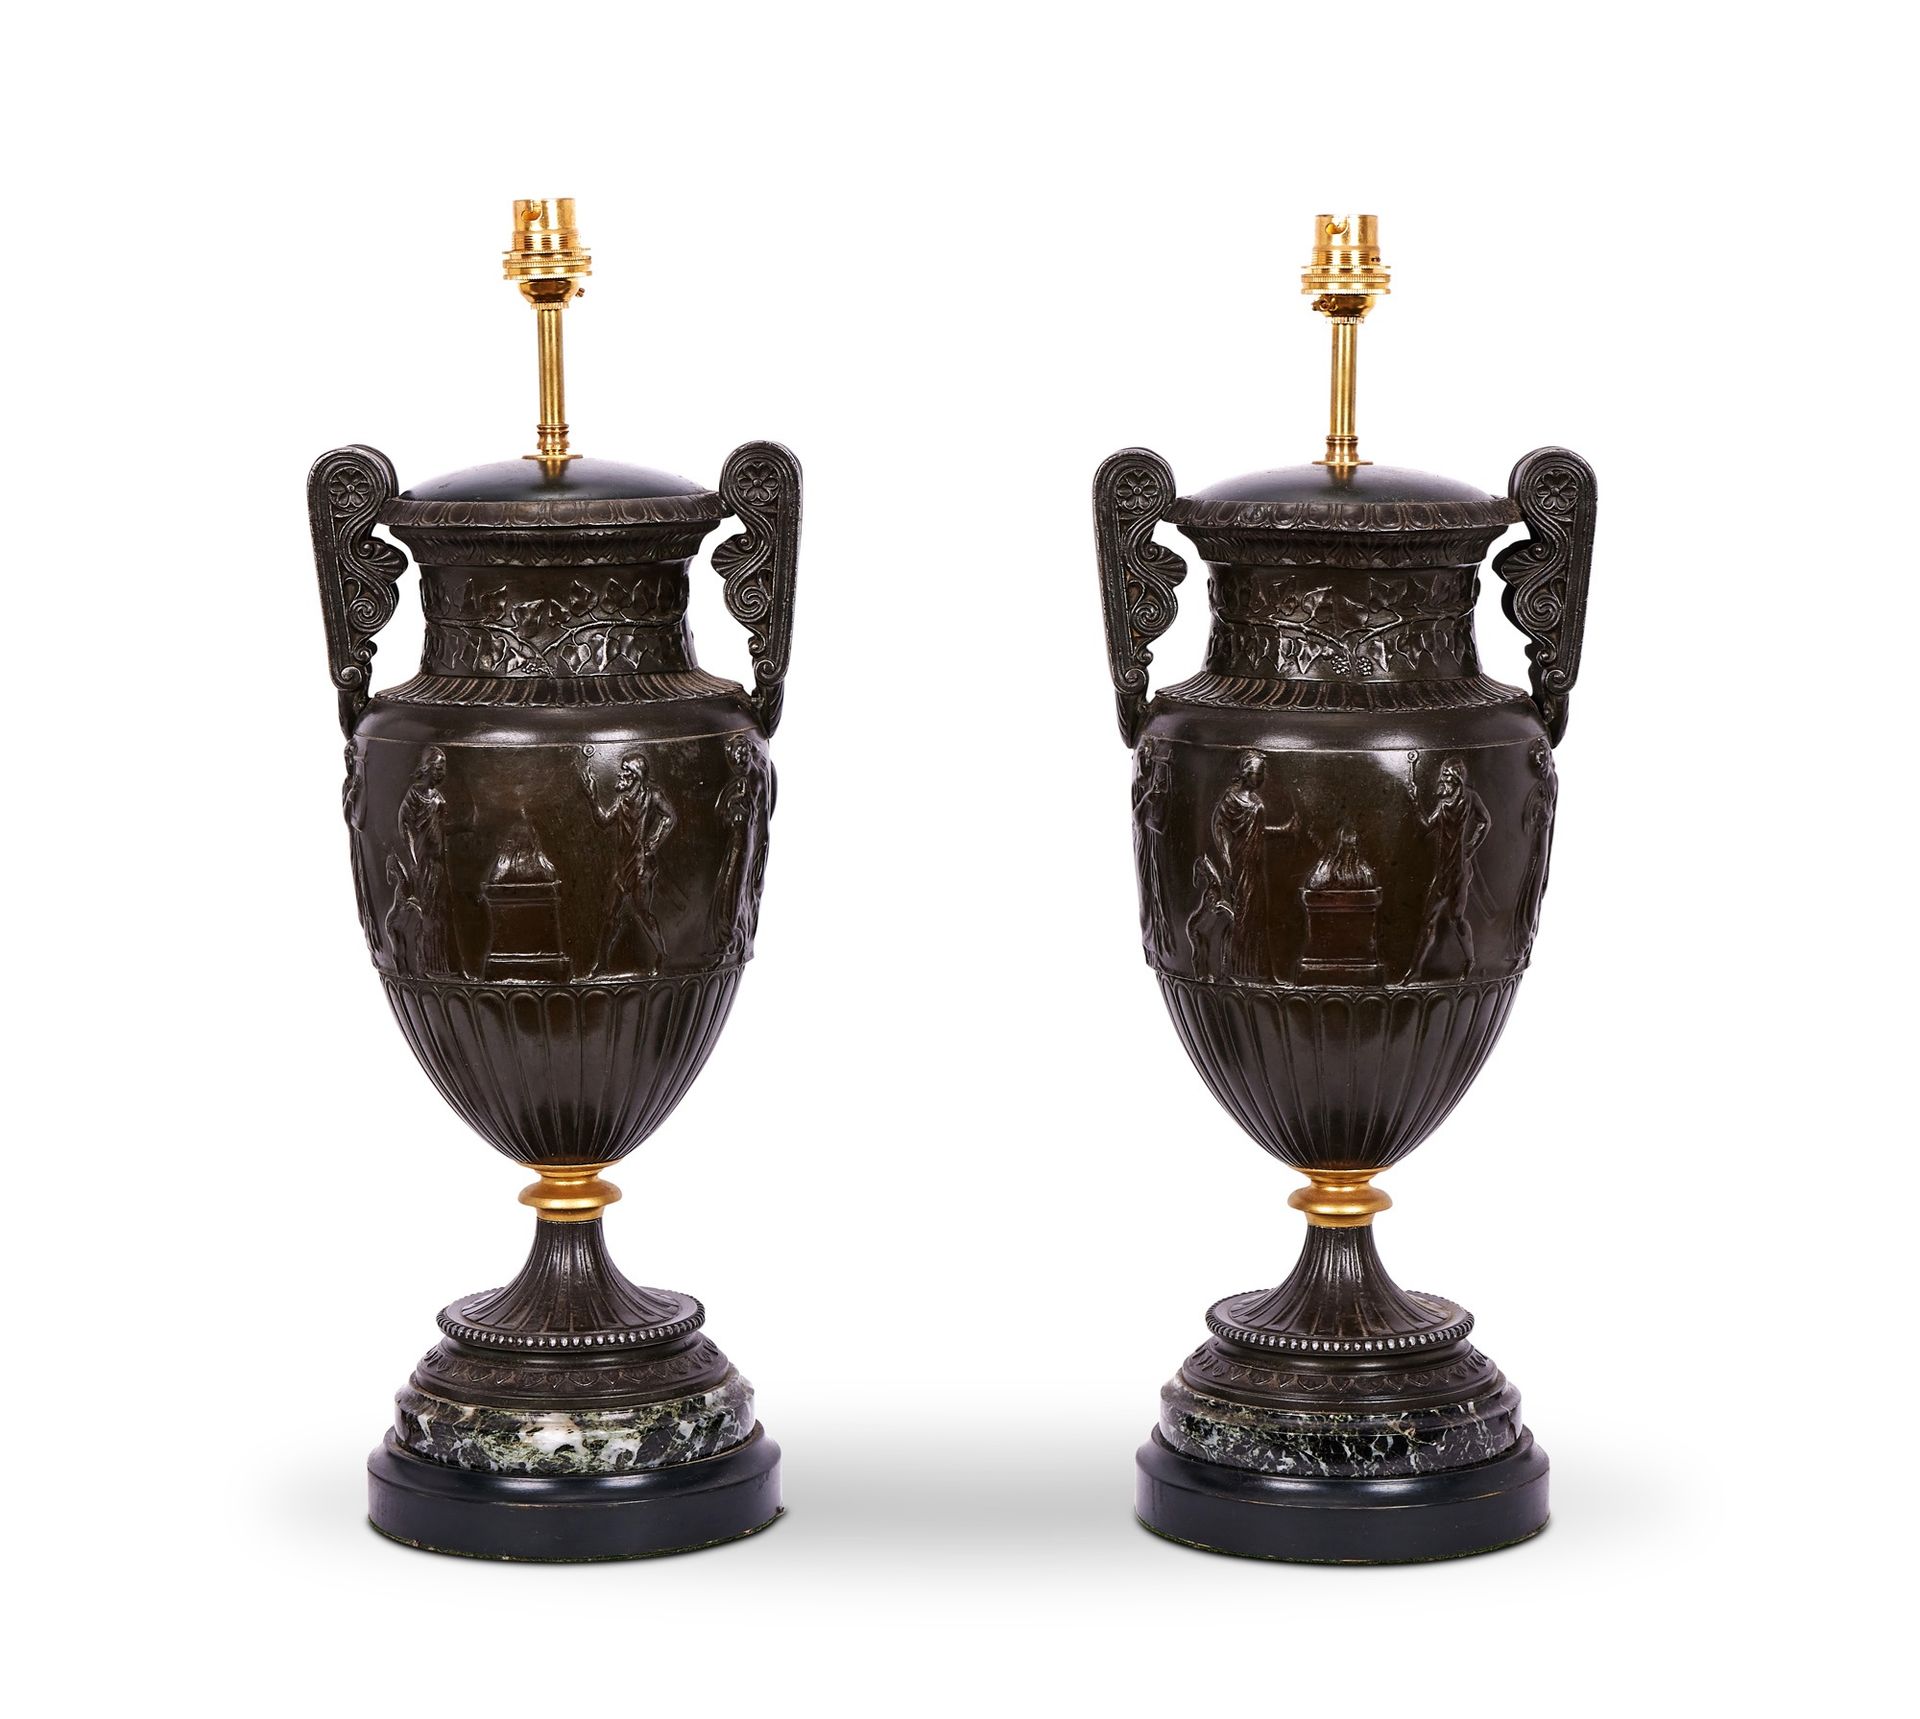 A PAIR OF 19TH CENTURY CLASSICAL STYLE LAMP BASES 一对19世纪古典风格的灯座 
一对19世纪古典风格的灯座
Ǟ&hellip;